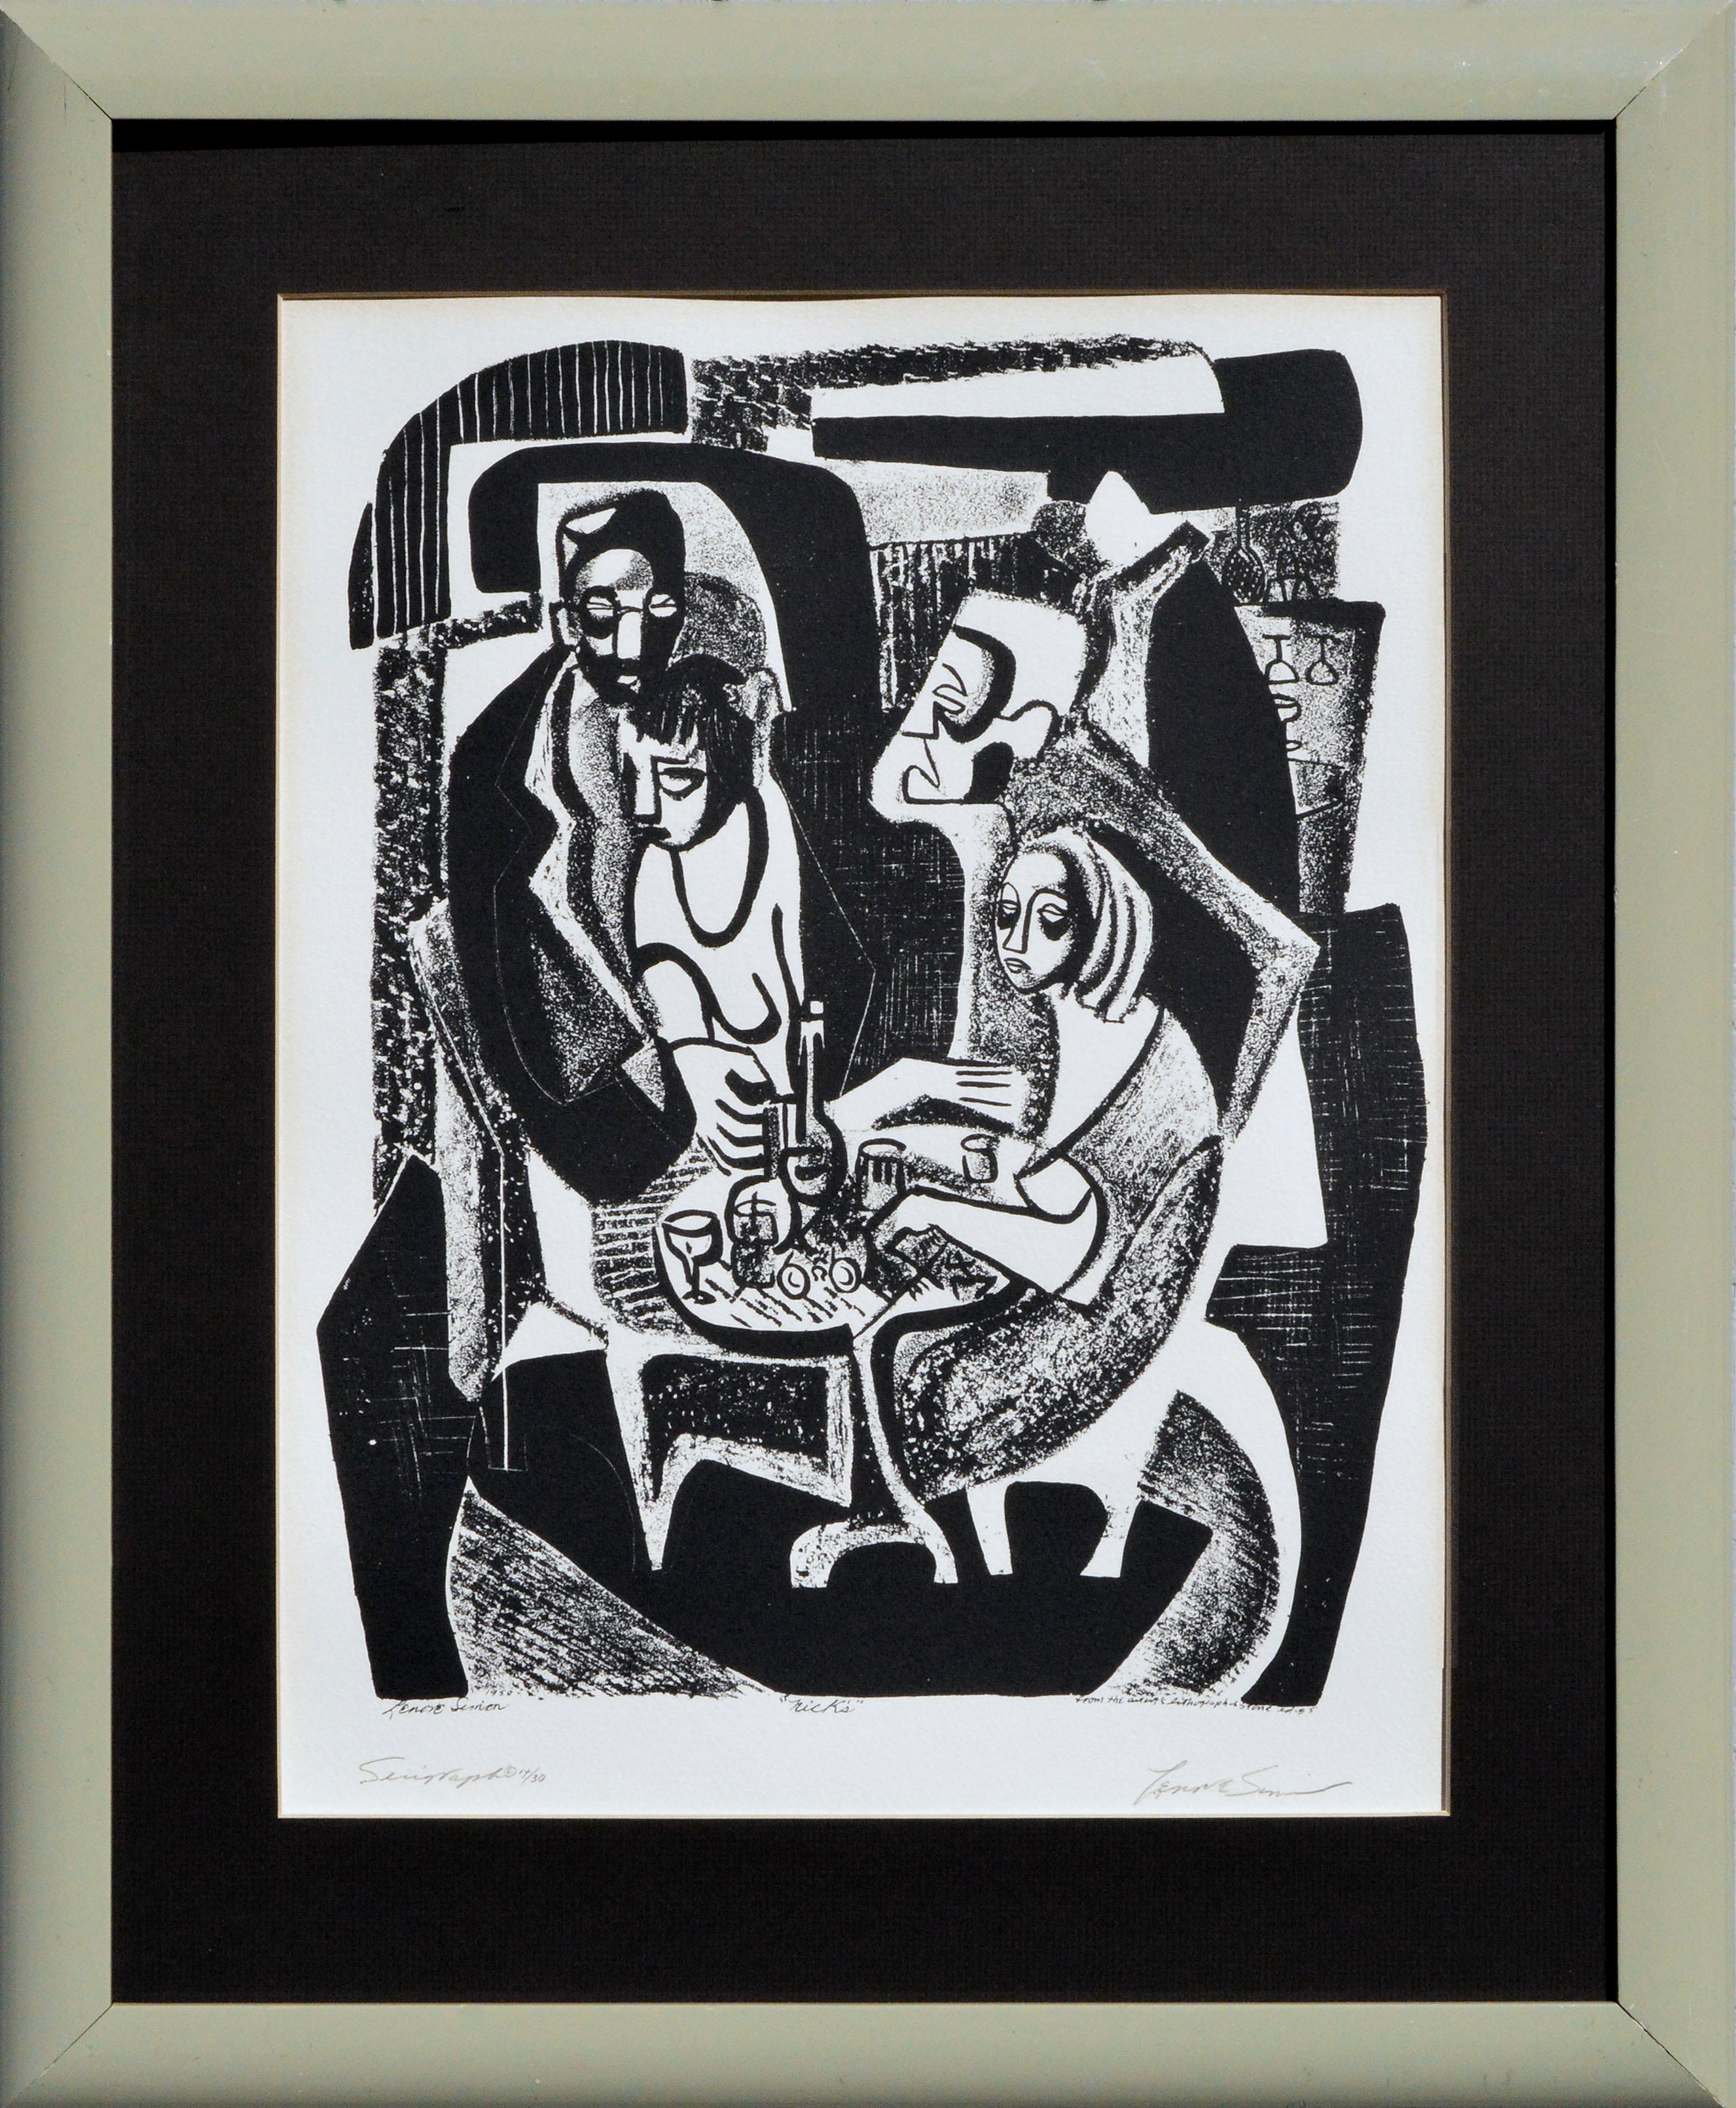 Lenore SImon Abstract Print - Nick's Coffee House in the Village - Rare Edition 1970s Modern Figurative Print